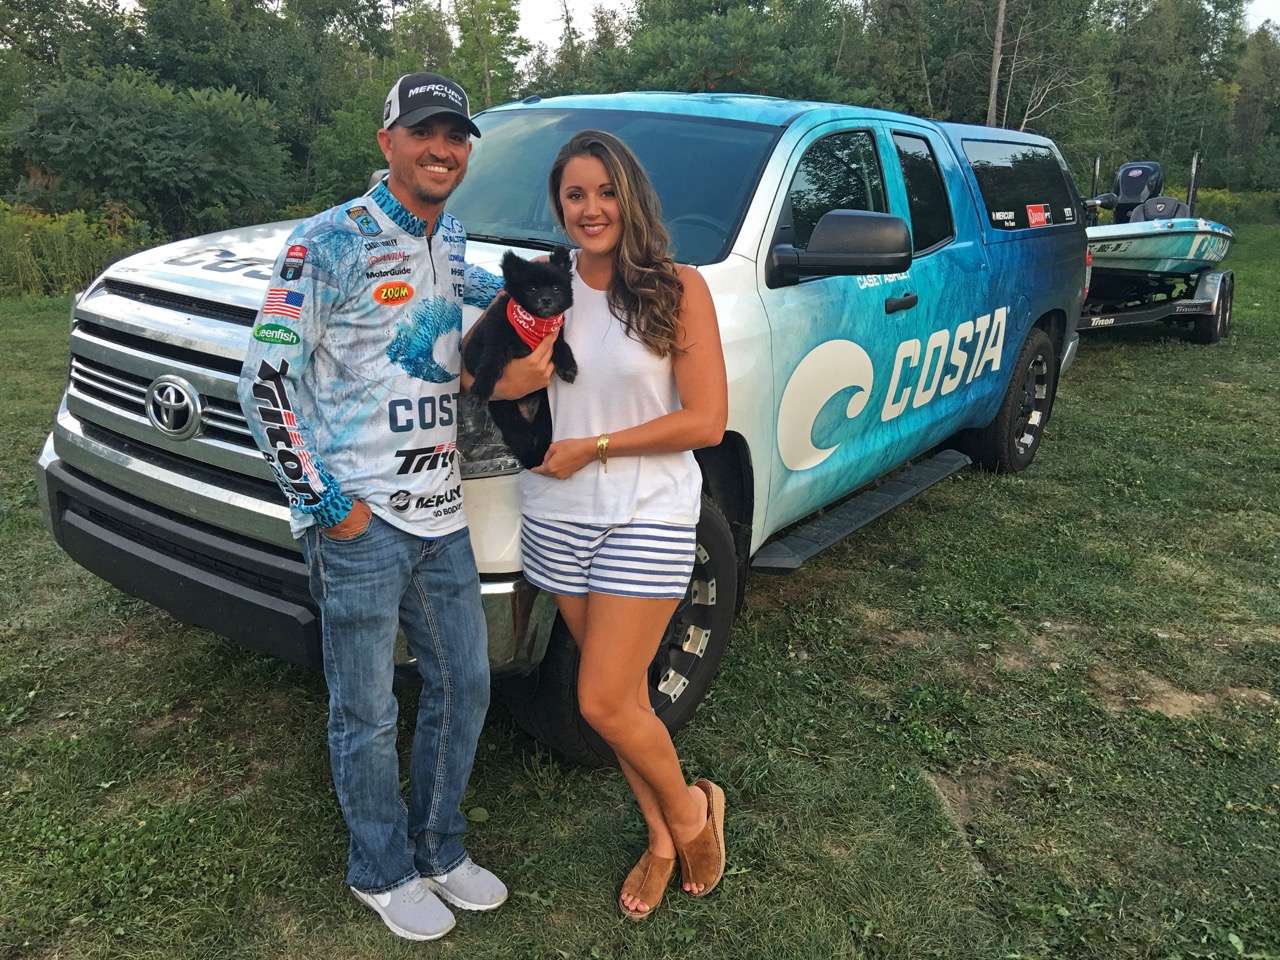 When Casey Ashley (with fiance Kenzie Hartman) made the Top 12 cut at the St. Lawrence River last year, Petey the little black Pomeranian rode through weigh-in with Casey. He was only slightly smaller than most of the smallmouth the Costa pro weighed in.